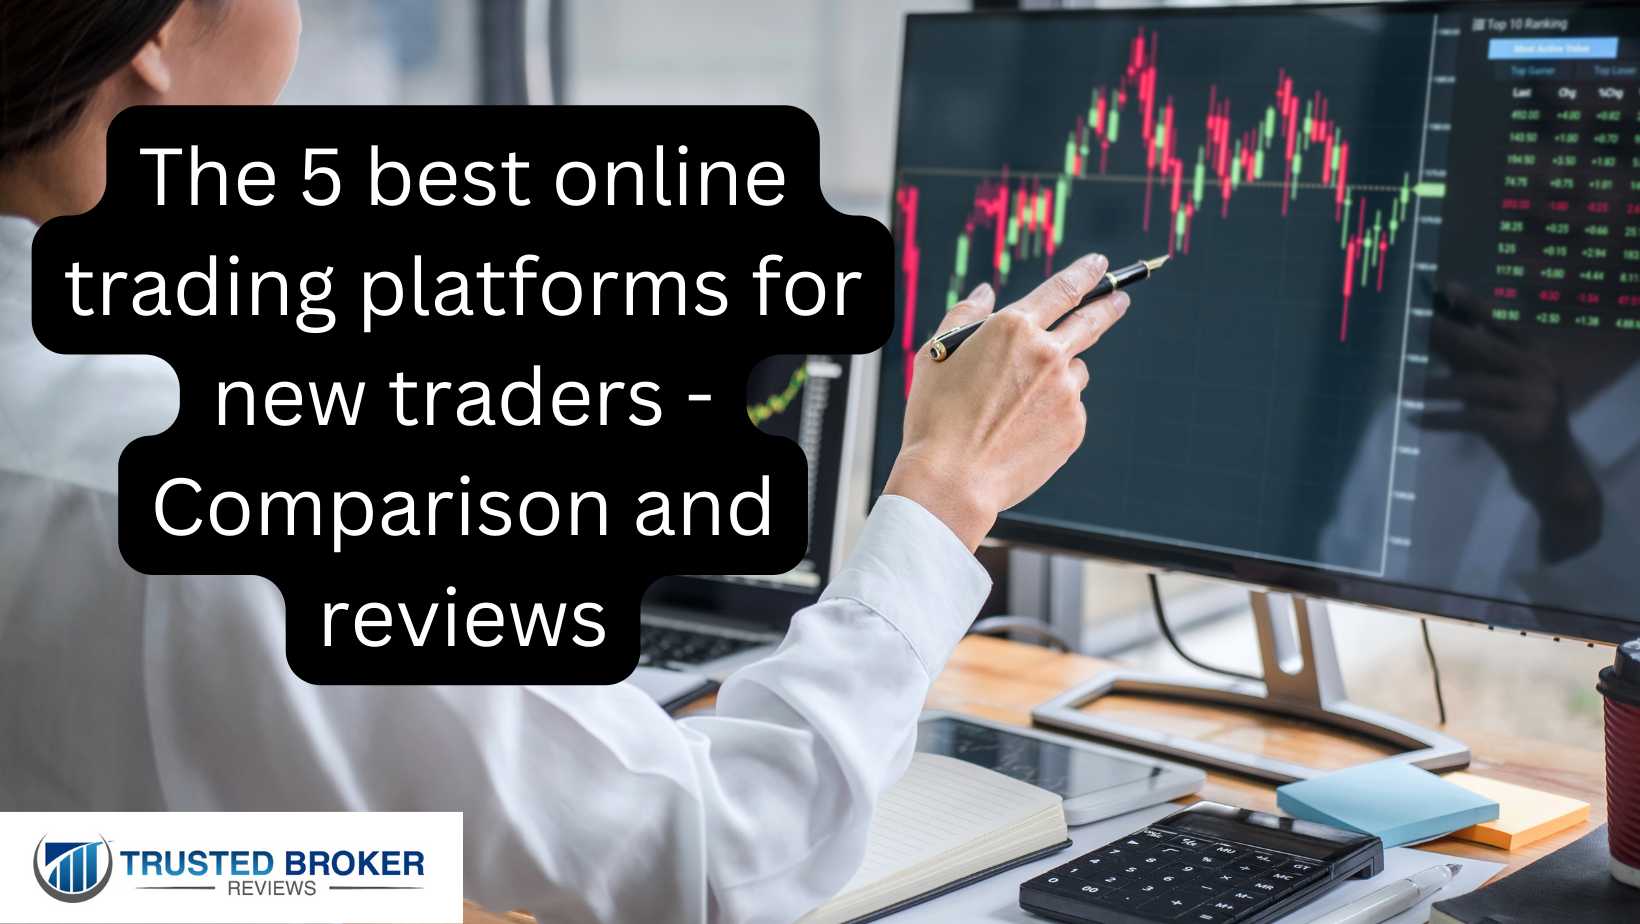 The 5 best online trading platforms for new traders - Comparison and reviews